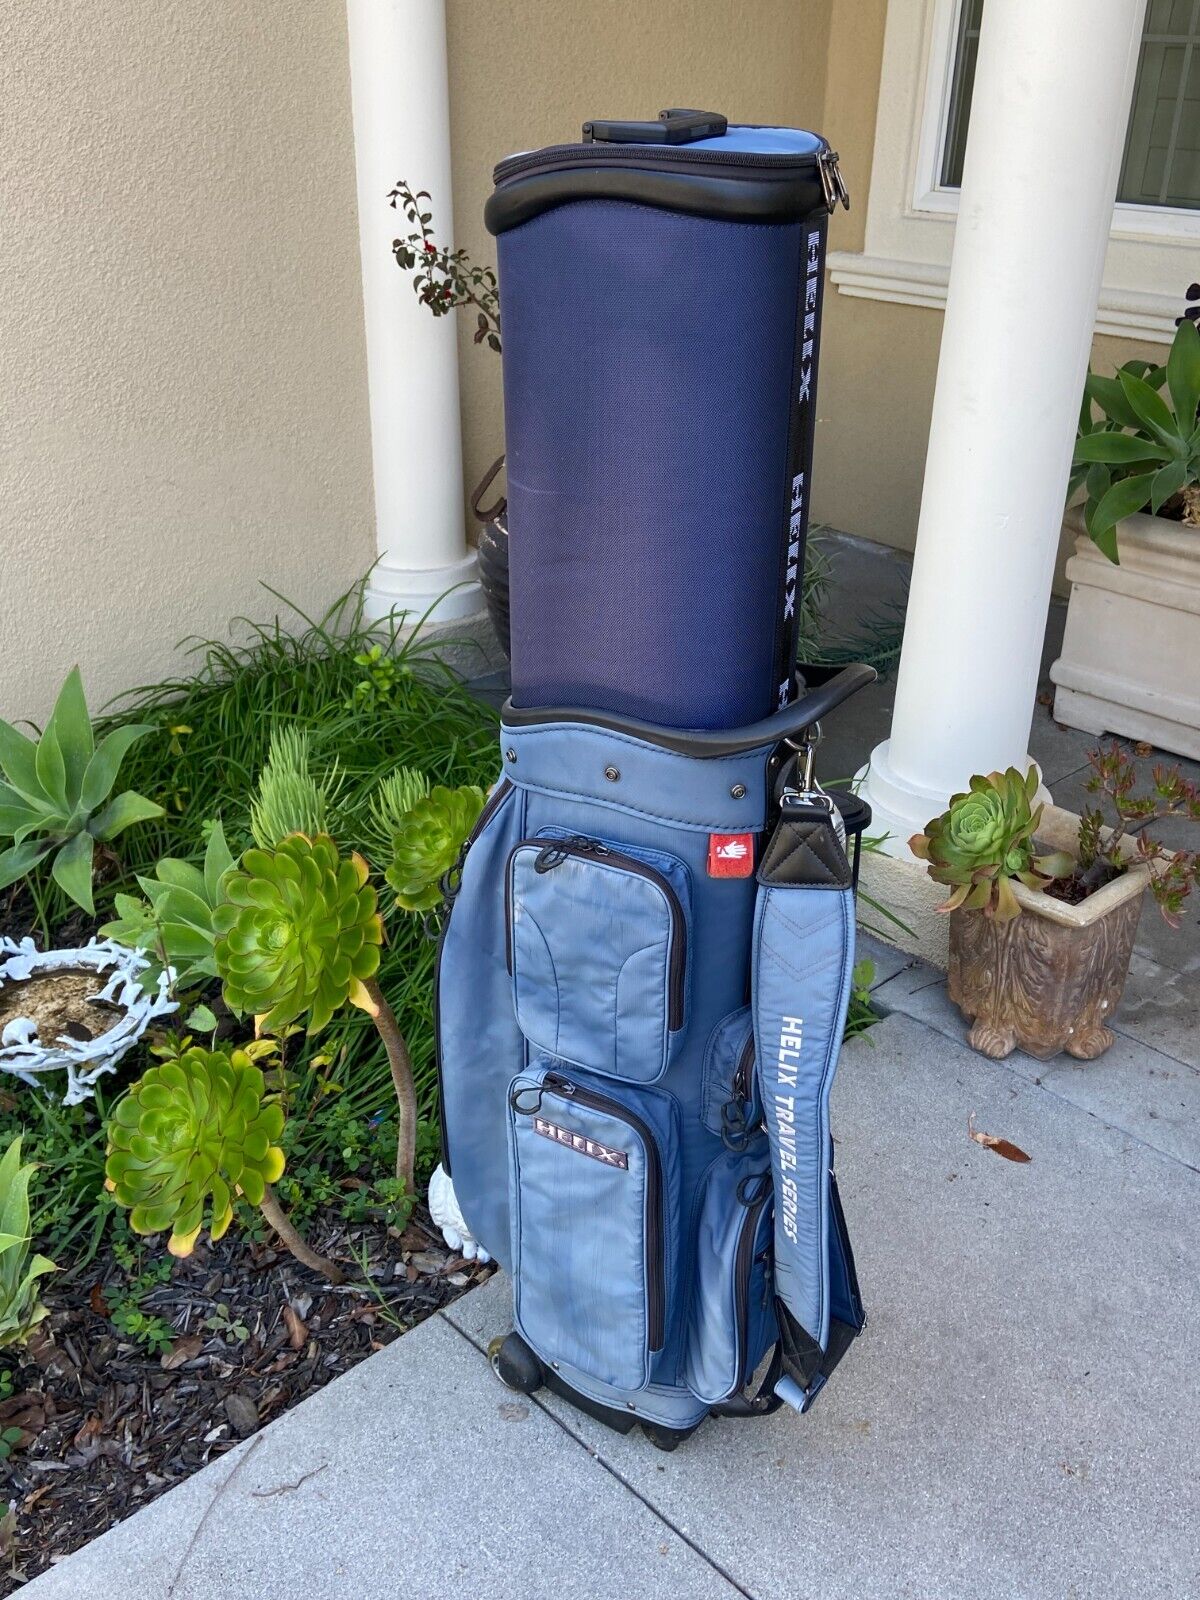 HELIX Golf Bag w/Wheels,Retractable RAIN COVER for Travel~Titleist,PING,CALLAWAY